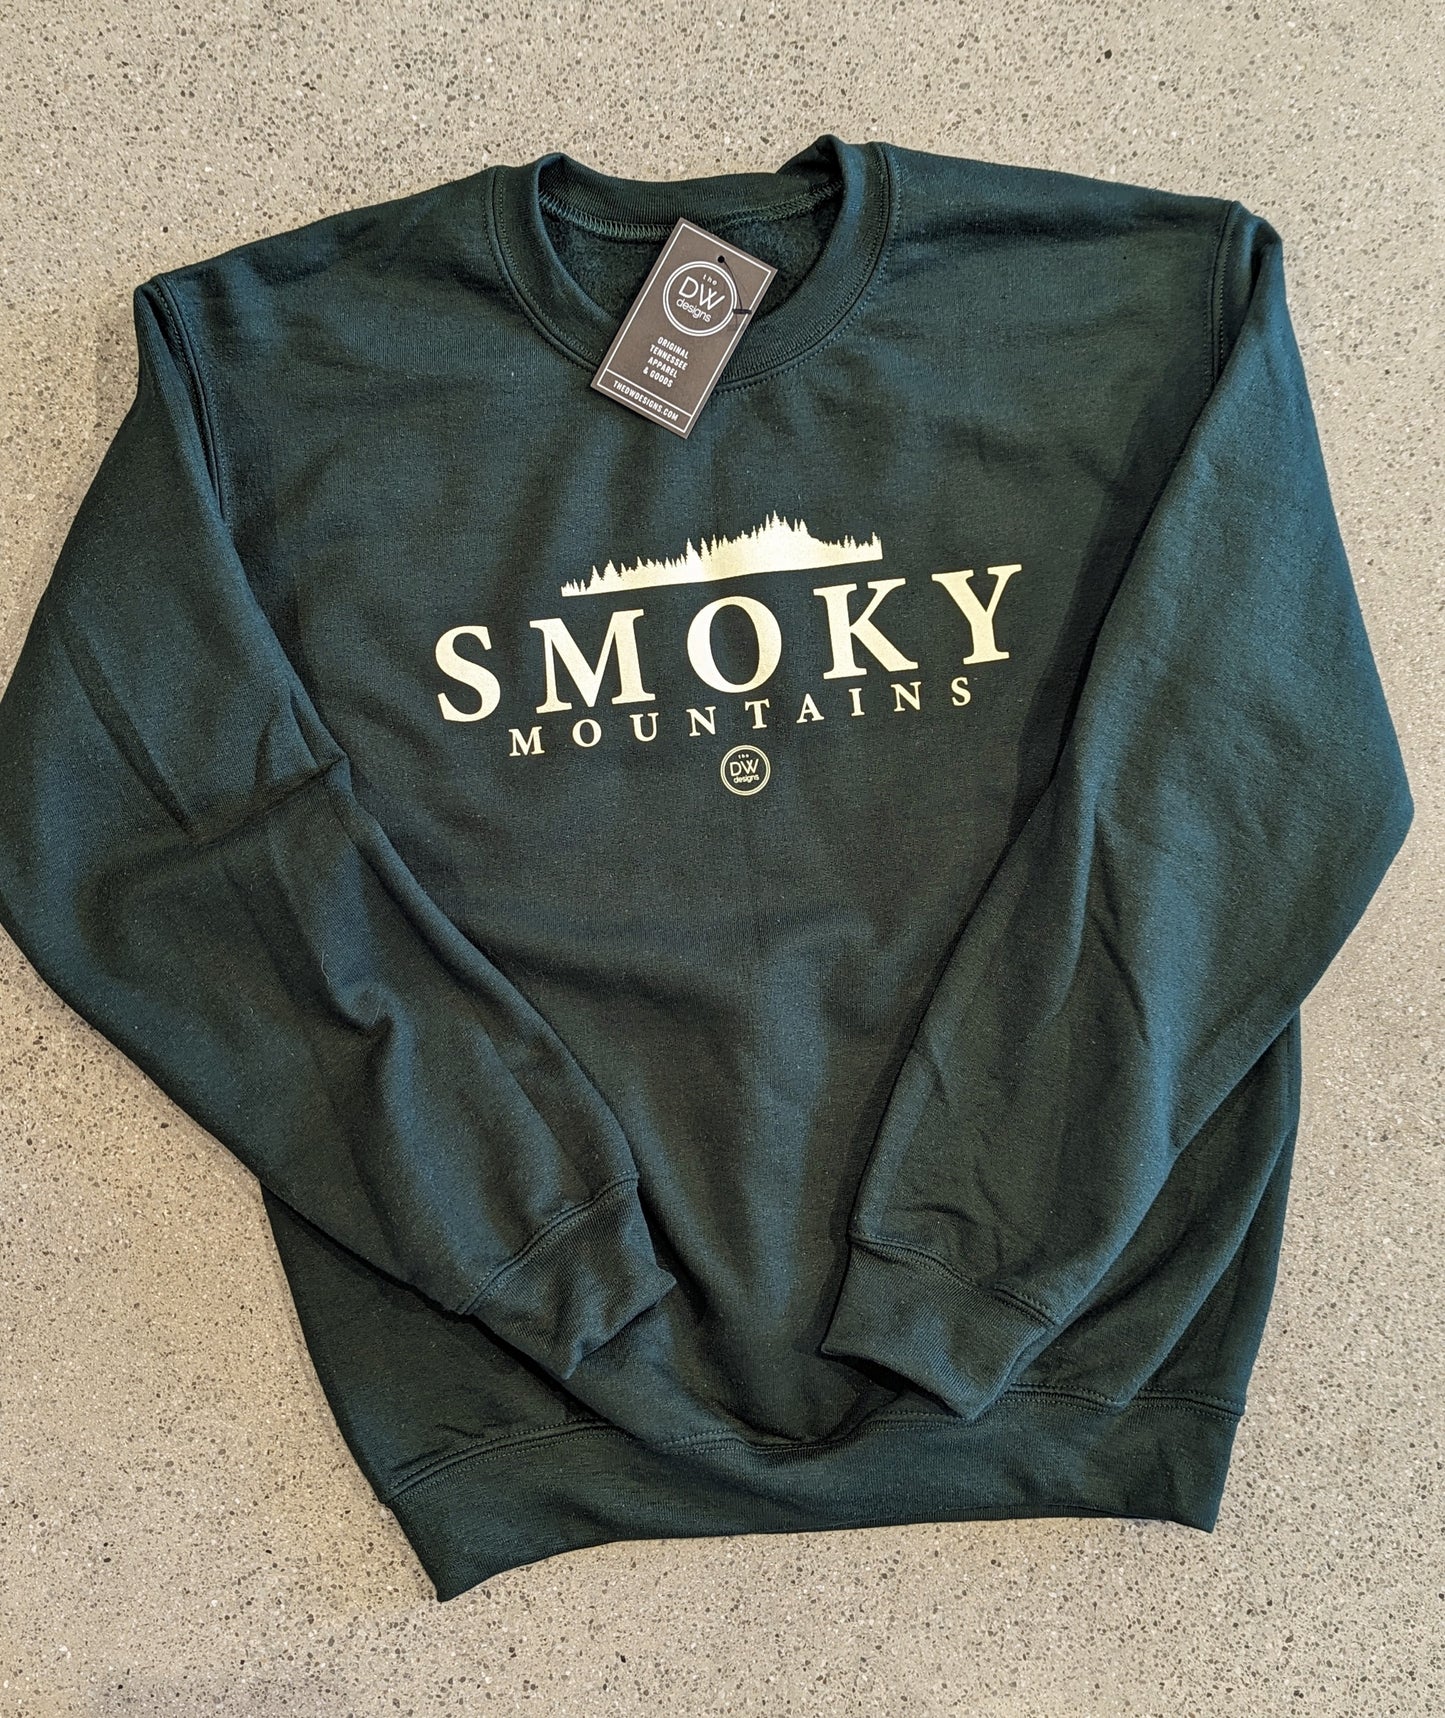 The Smoky Mountains Sweatshirt - FOREST